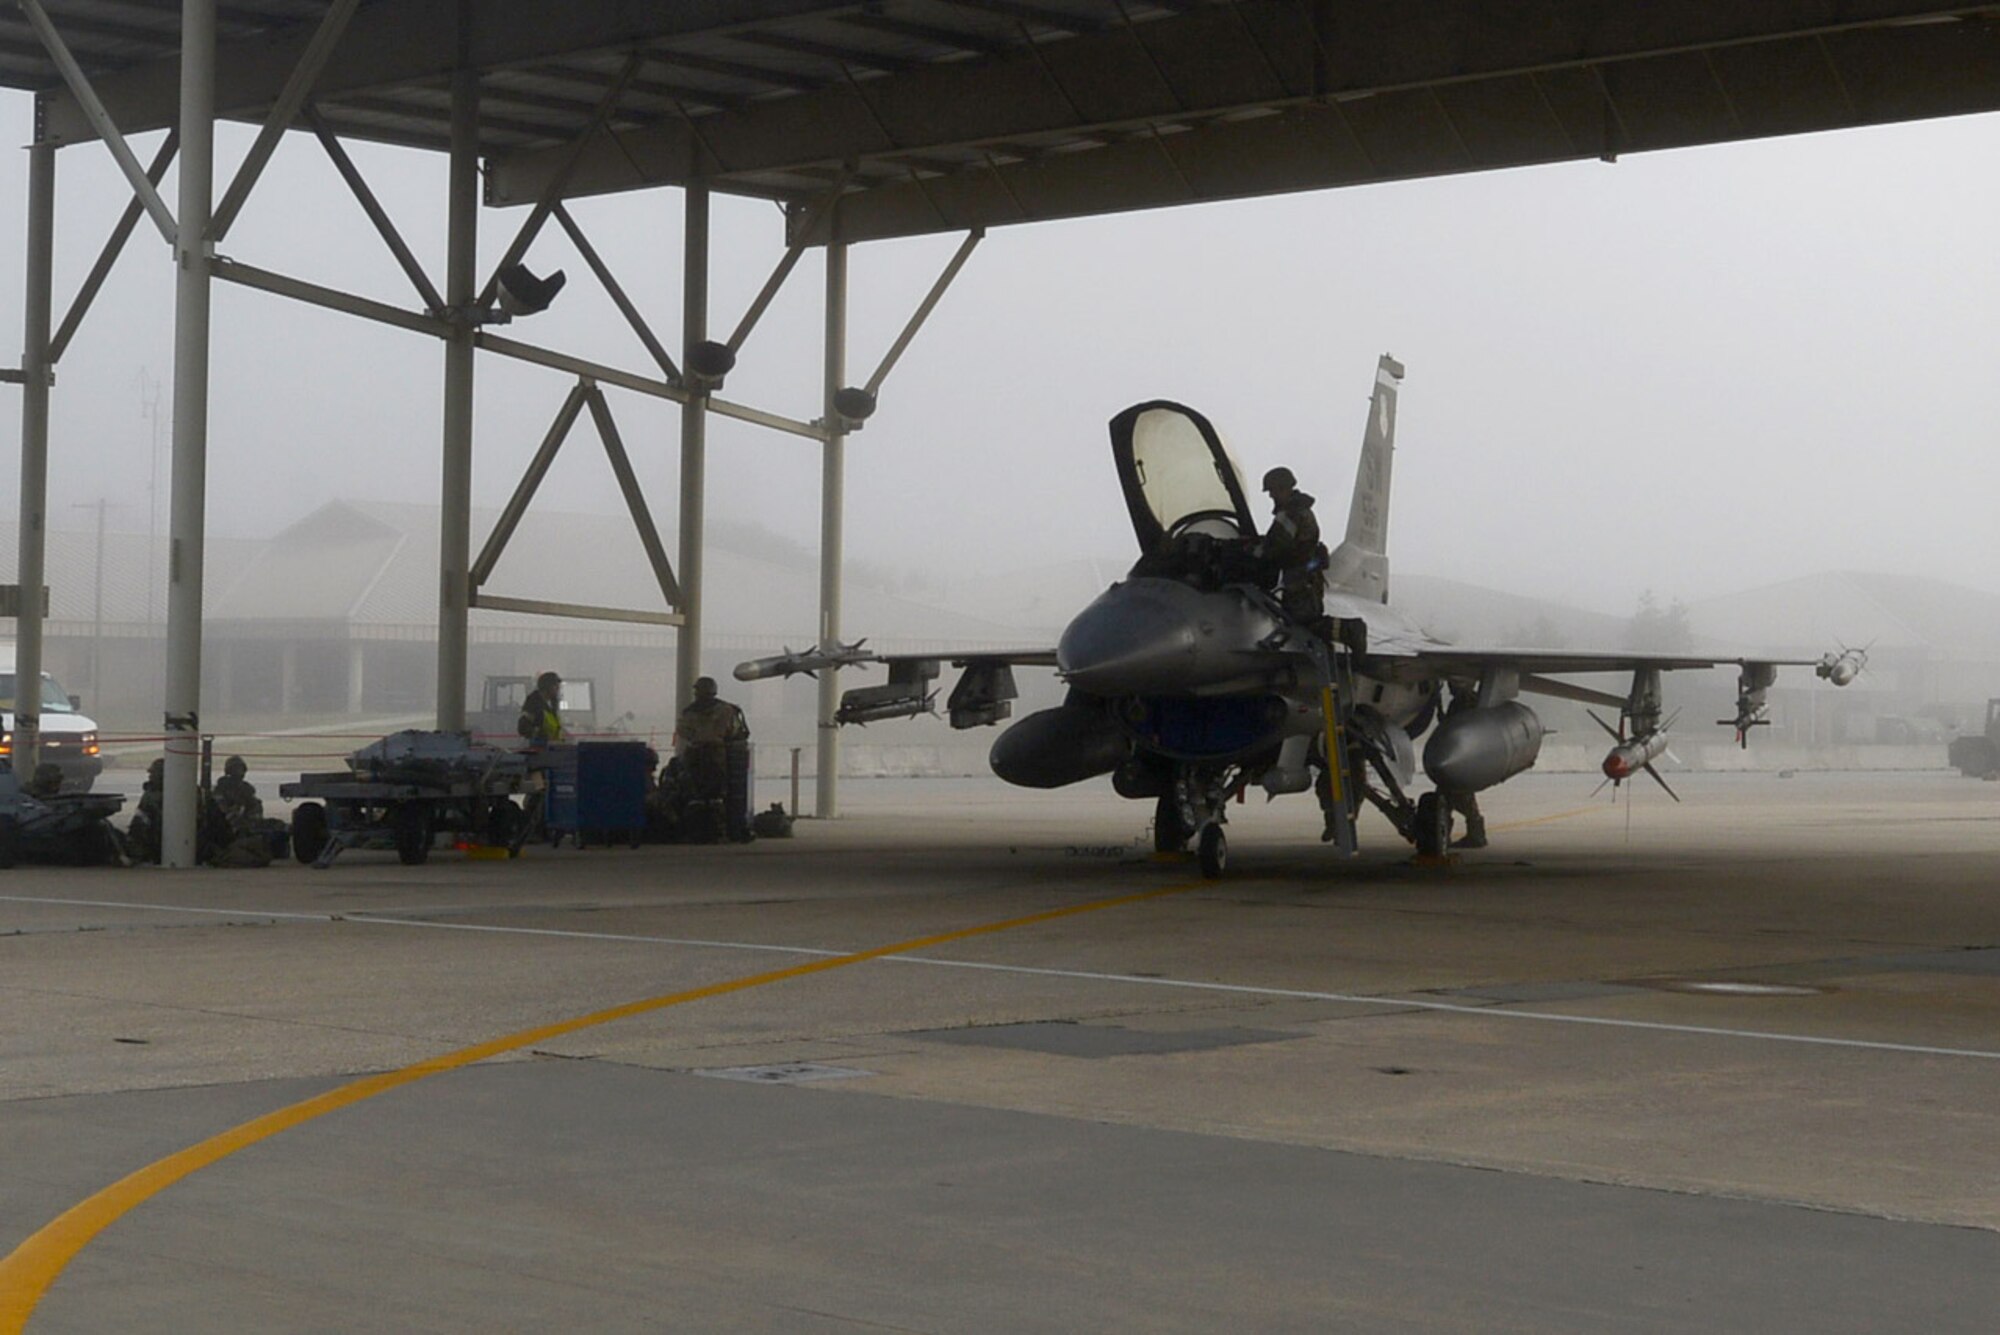 U.S. Air Force Airmen prepare an F-16CM Fighting Falcon during operational readiness exercise Weasel Victory 15-06 at Shaw Air Force Base, S.C., May 28, 2015. During an ORE, Airmen perform their duties under simulated deployed conditions. (U.S. Air Force photo by Senior Airman Diana M. Cossaboom/Released)